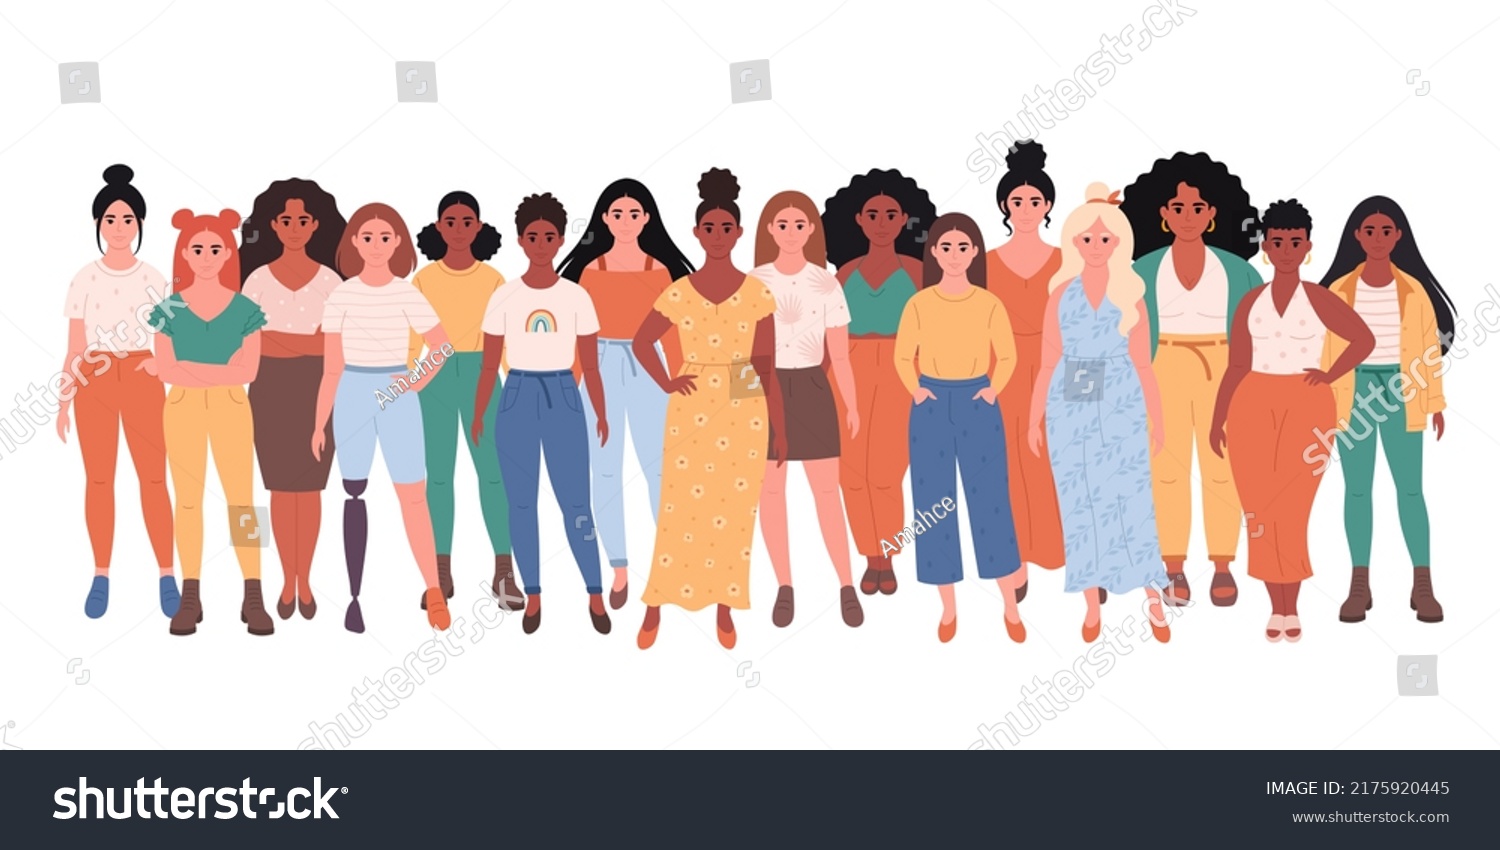 Women of different races, body types, hairstyles. Social diversity of people in modern society. Woman with physical disability. Fashionable casual outfit. Hand drawn vector illustration #2175920445